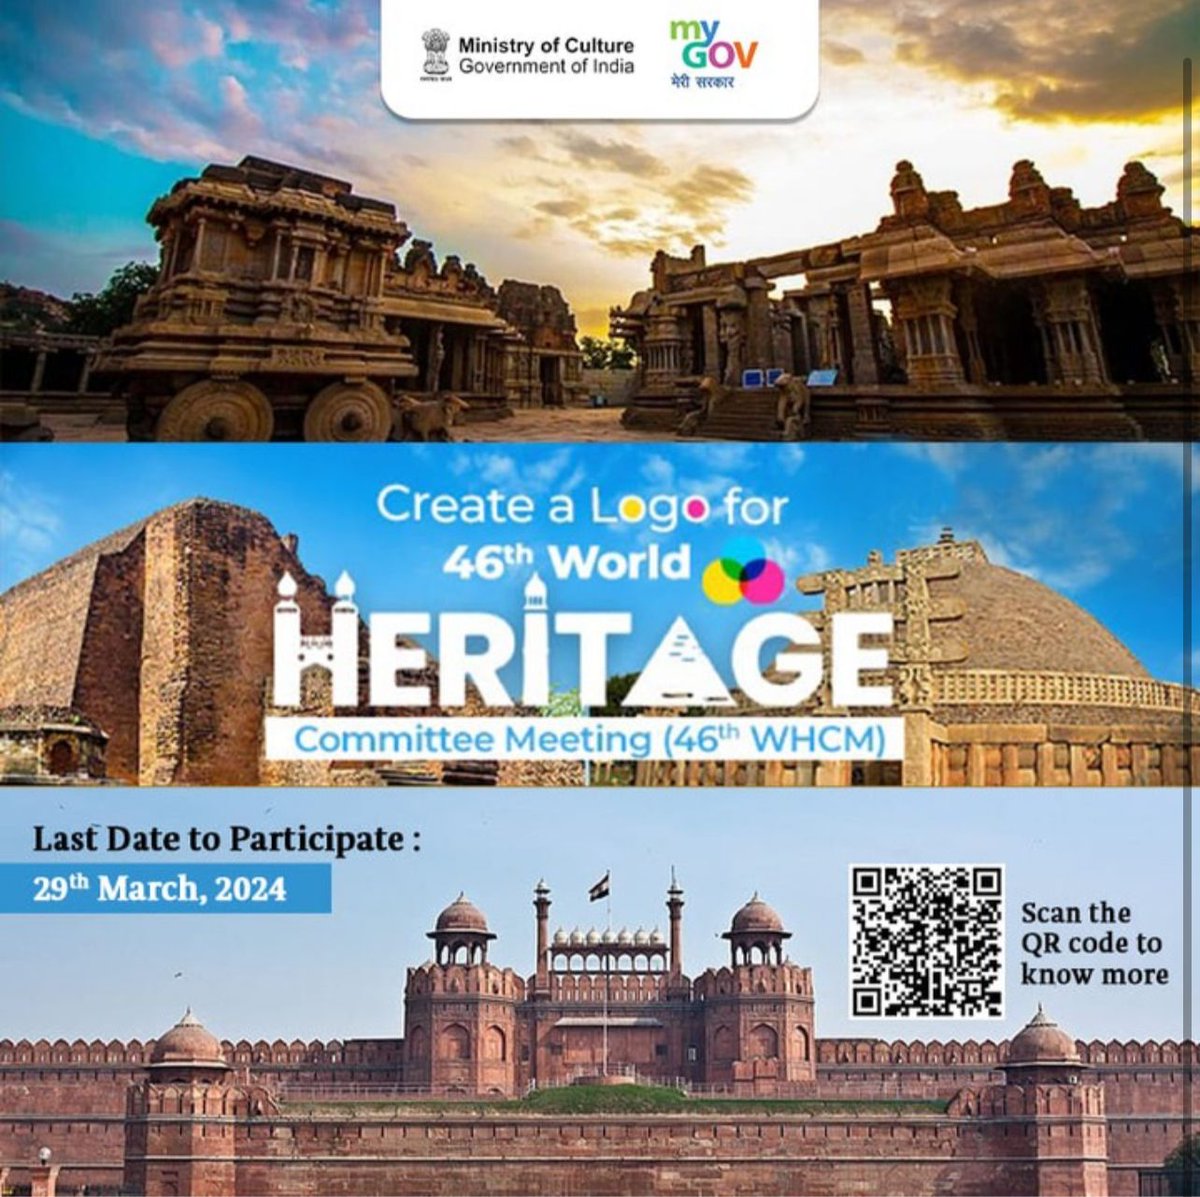 India proudly hosts the 46th World Heritage Committee Meeting in July 2024. Express your creativity to design a logo that captures our incredible built heritage. 🏛️ Don't miss the opportunity to submit your design by March 29, 2024. Scan the QR code for details #CultureUnitesAll